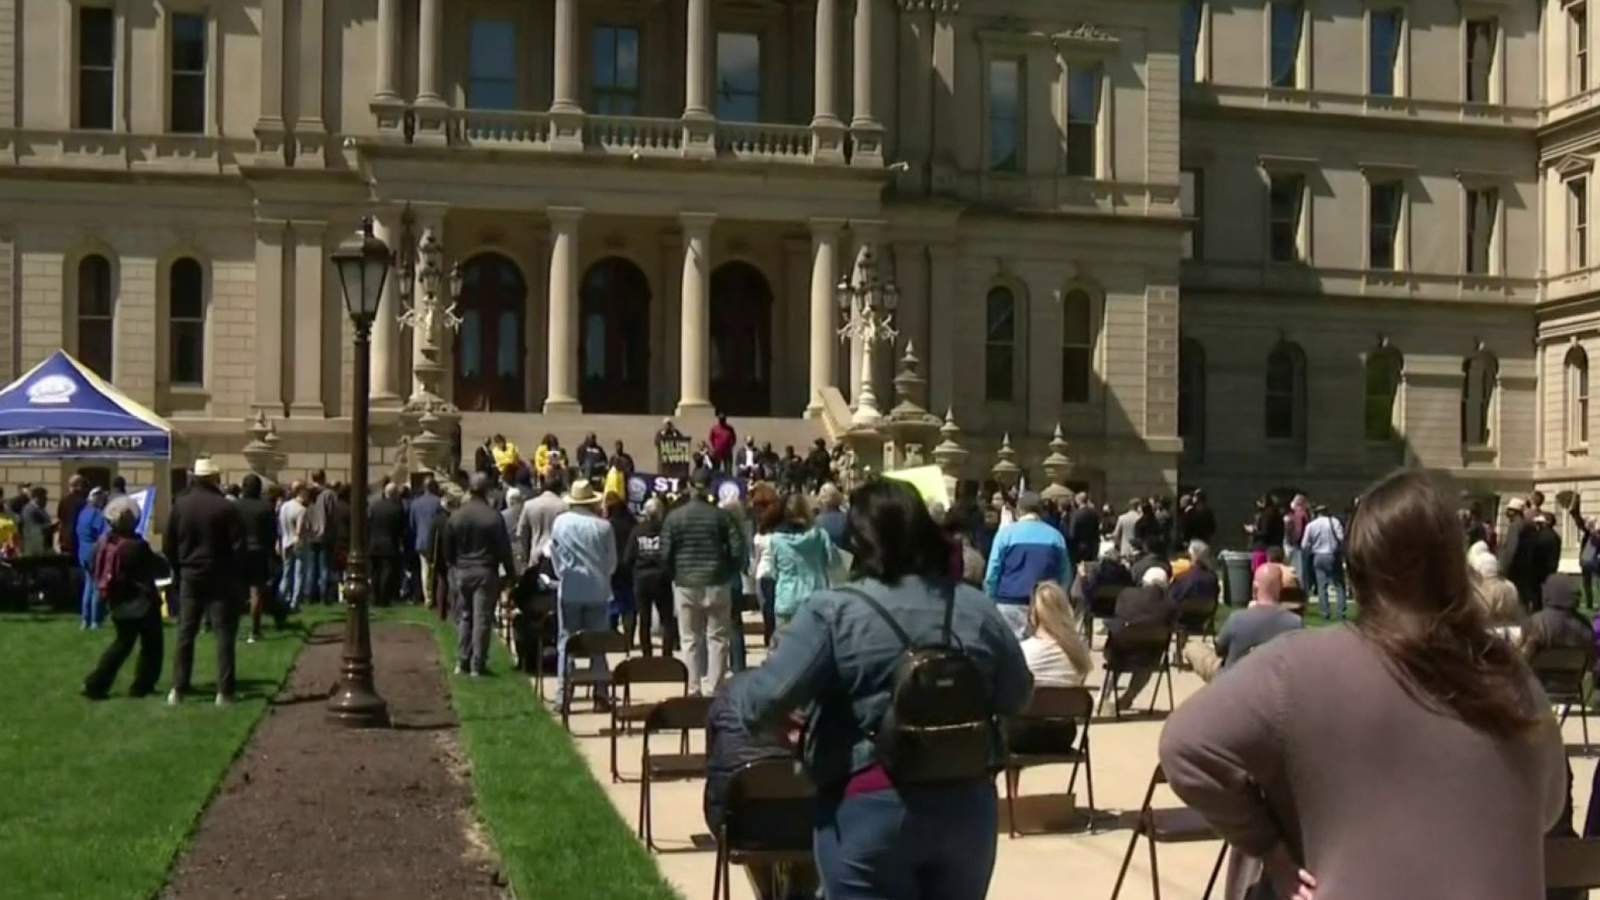 Groups rally against proposed election bills in Michigan